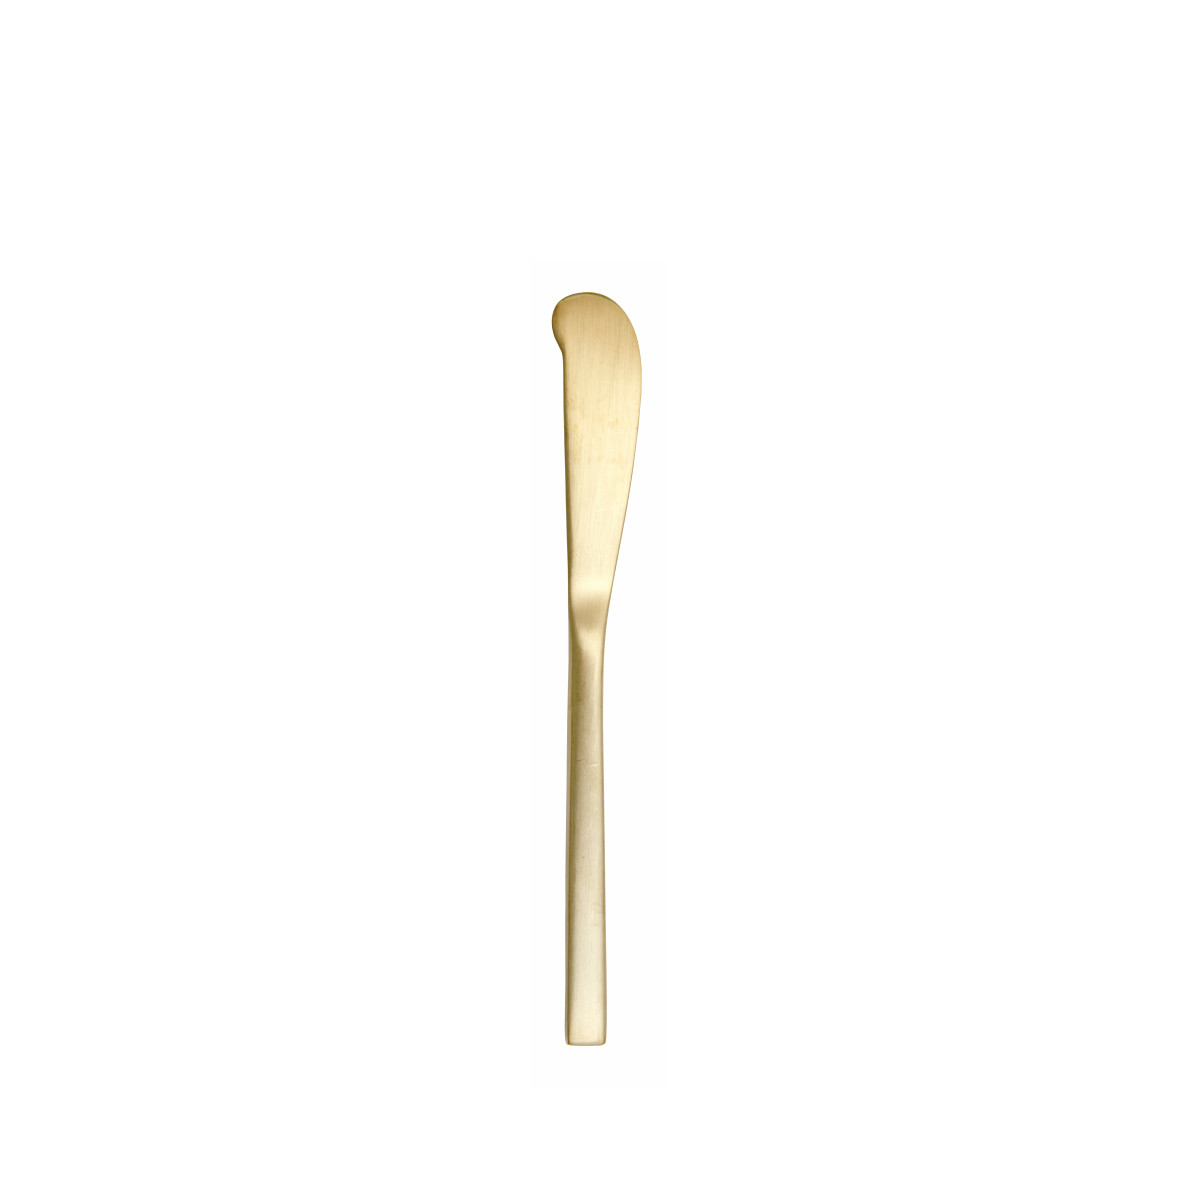 Arezzo Brushed Gold Butter Knife 7.75"